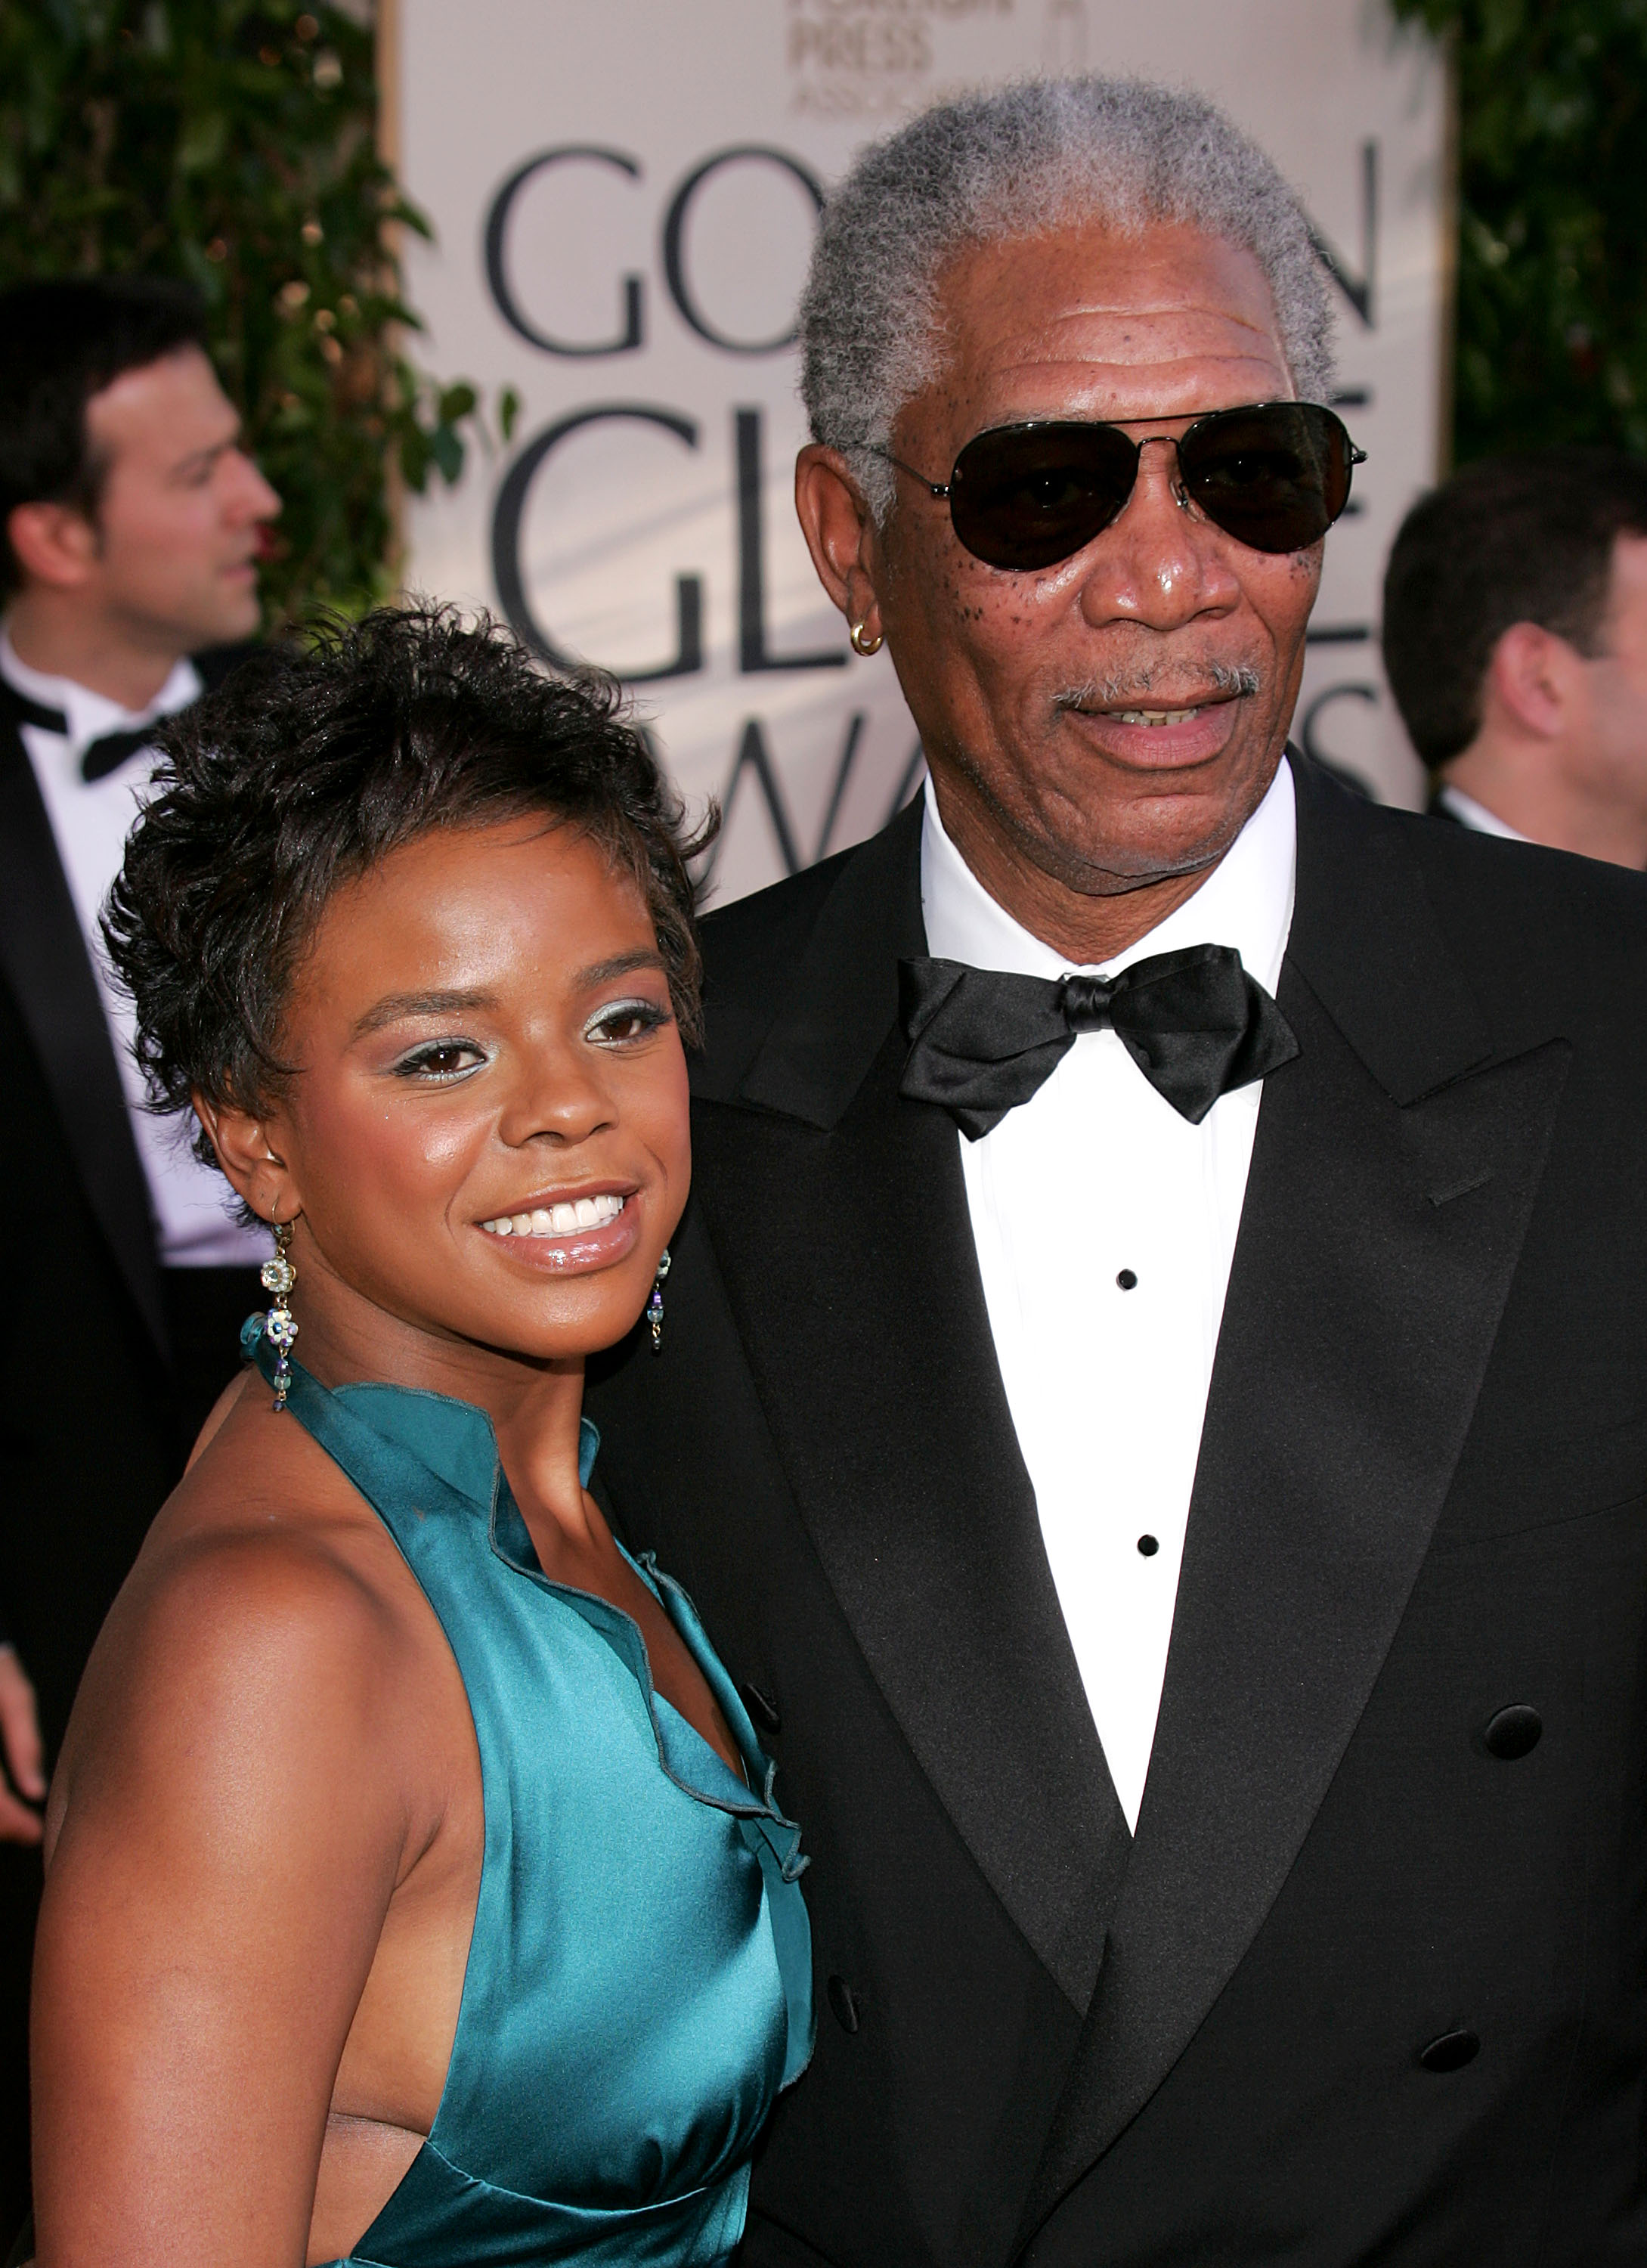 Actor Morgan Freeman and granddaughter E'Dena Hines arrive to the 62nd Annual Golden Globe Awards at the Beverly Hilton Hotel January 16, 2005 in Beverly Hills, California. (Kevin Winter—Getty Images)